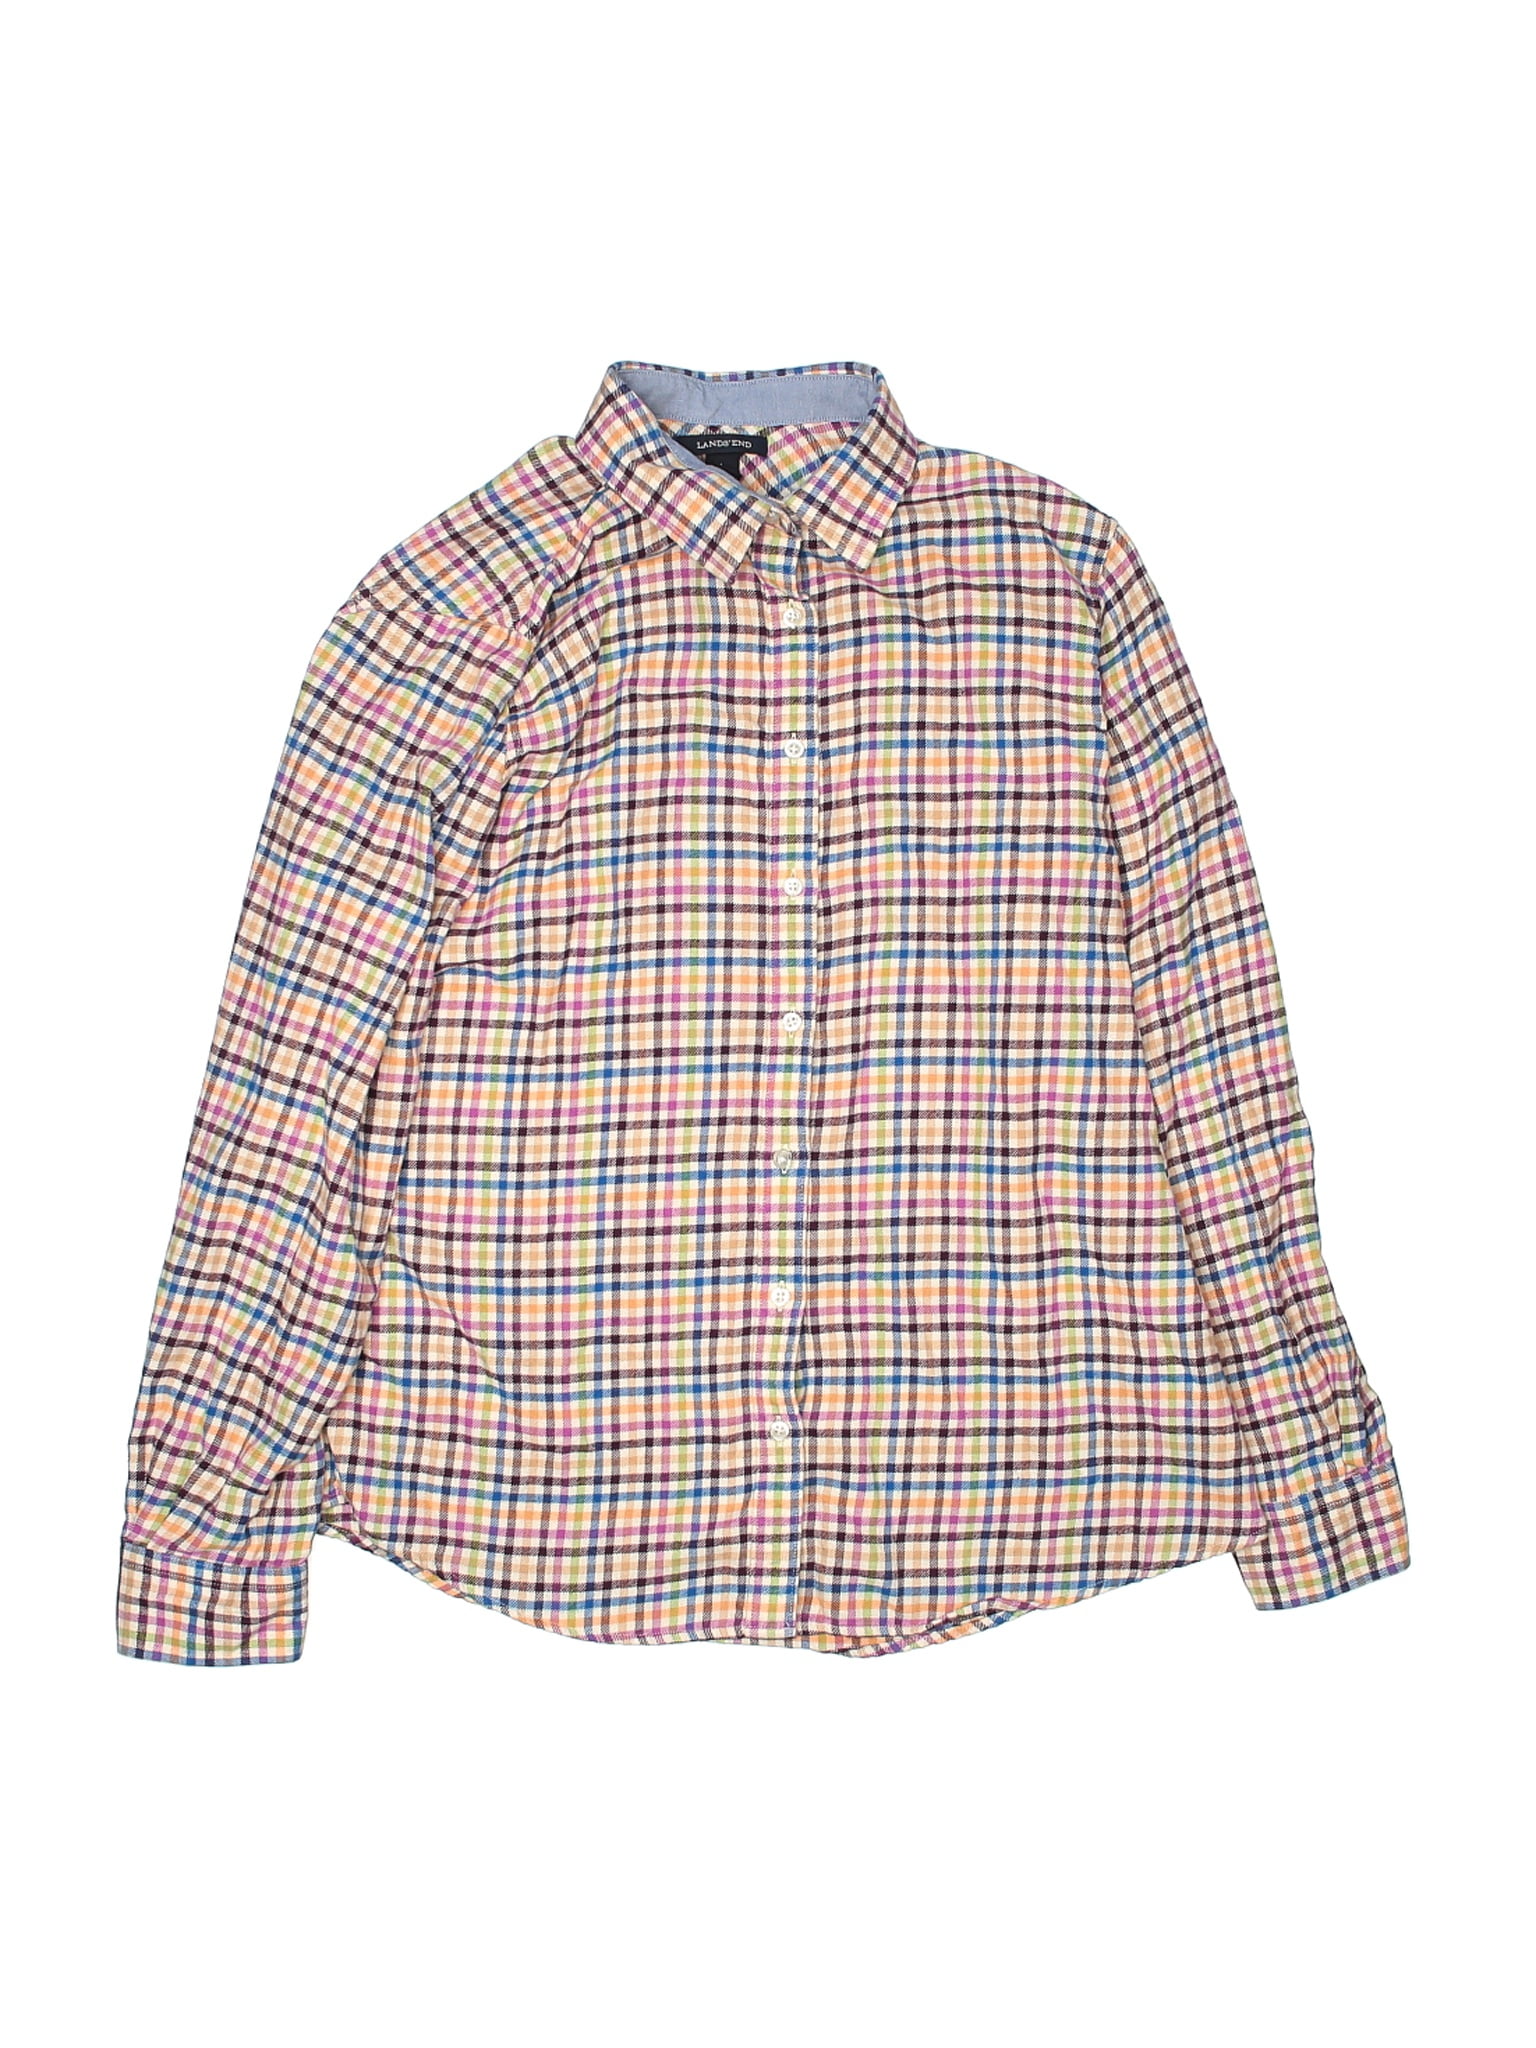 Lands' End - Pre-Owned Lands' End Boy's Size 14 Long Sleeve Button-Down ...